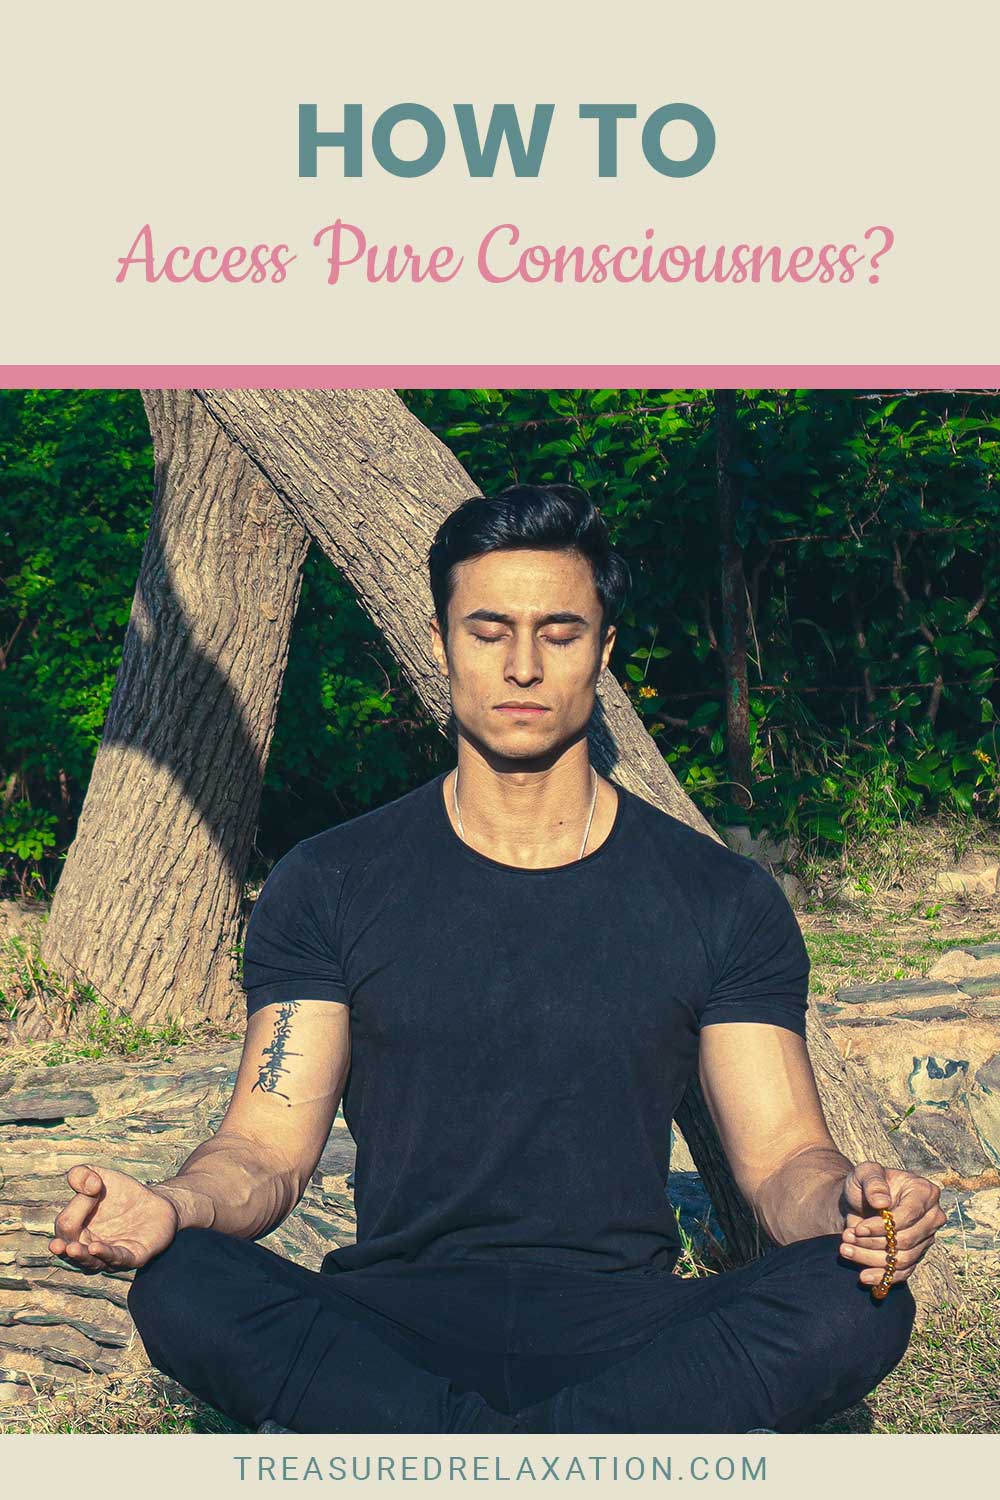 How to Access Pure Consciousness?